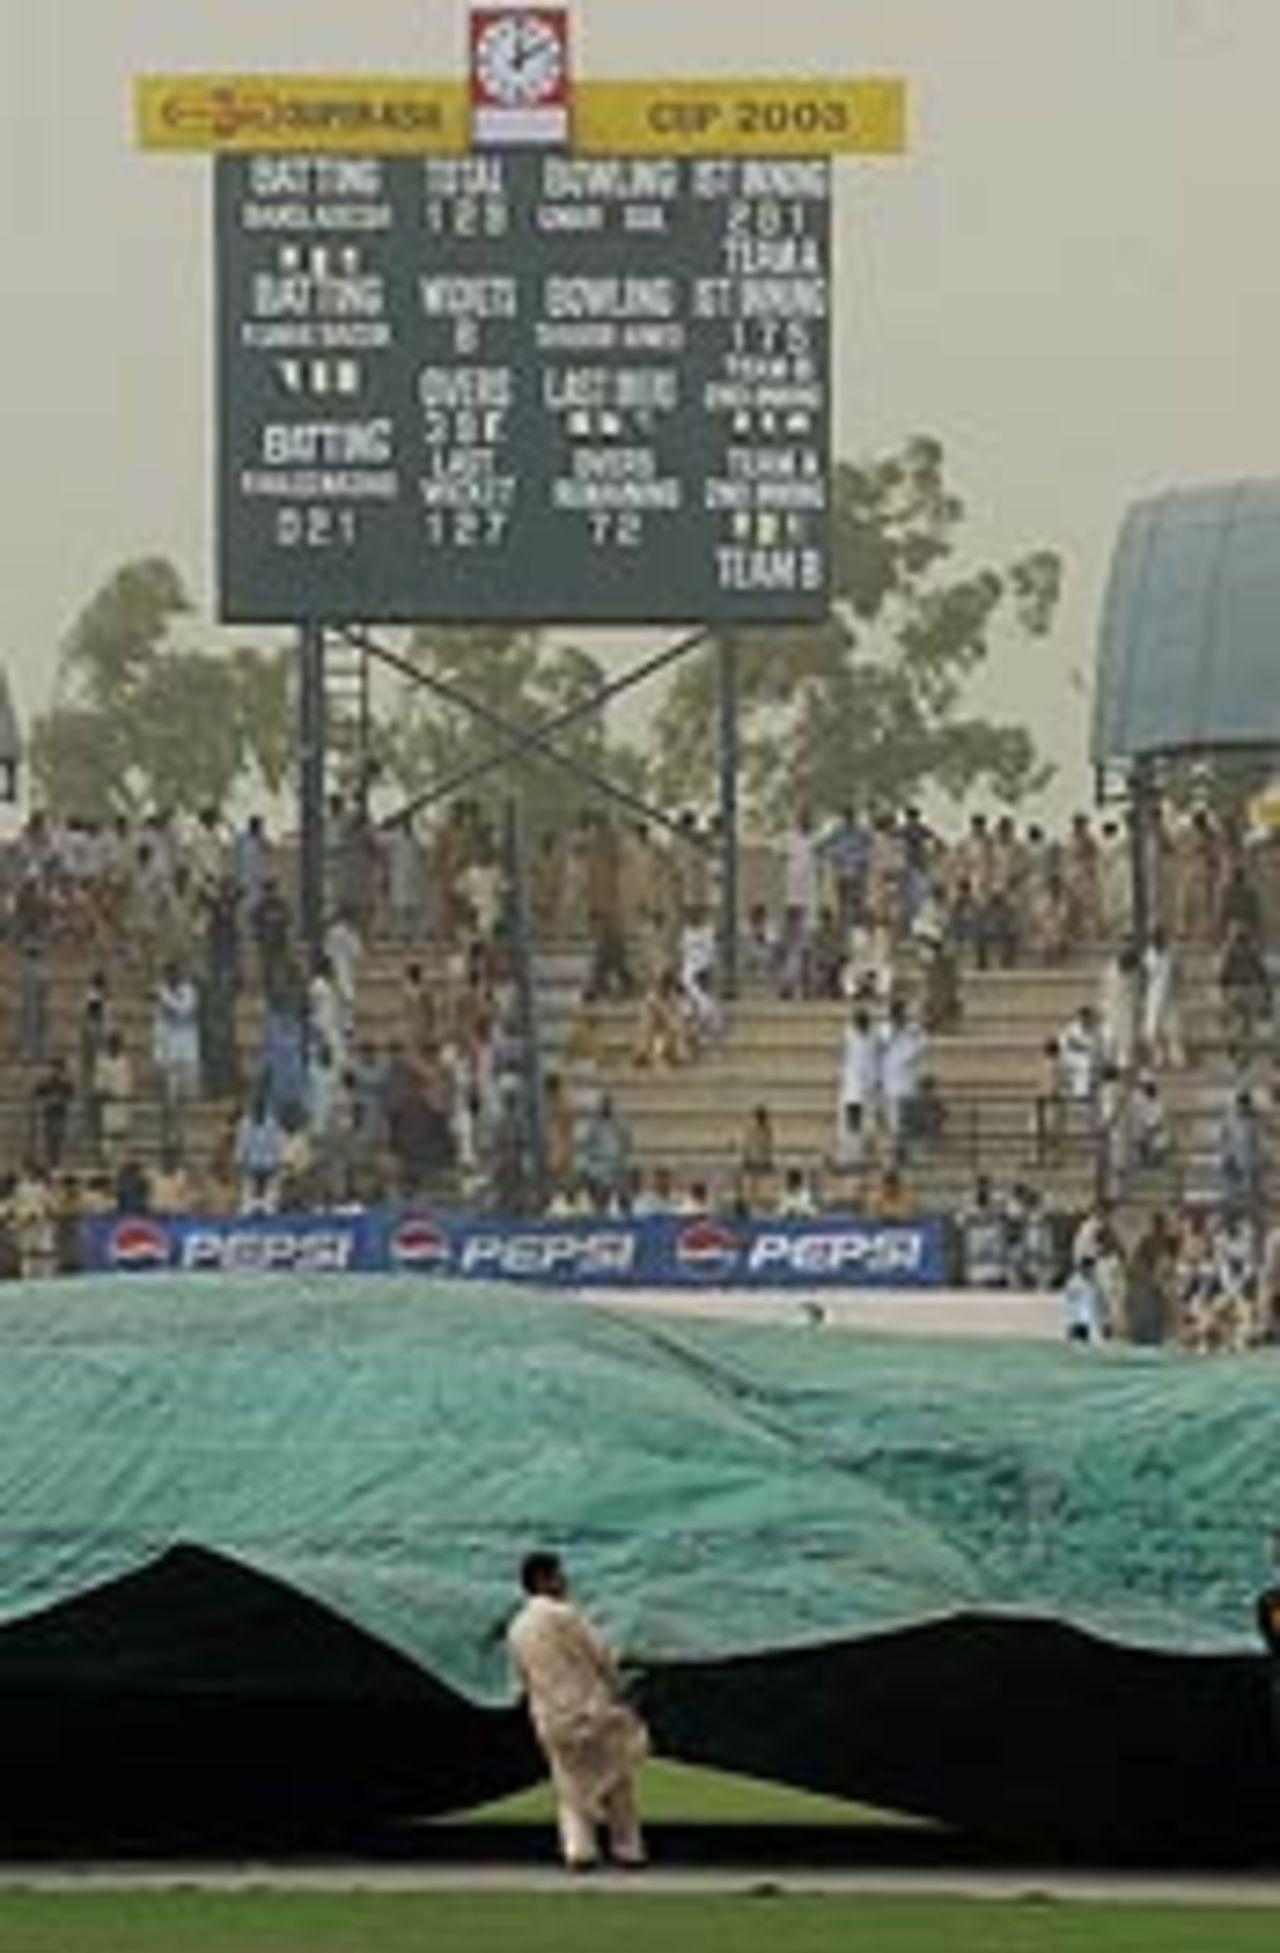 Groundsman struggles with the covers, Pakistan v Bangladesh, 3rd Test, Day 3, September 5, 2003